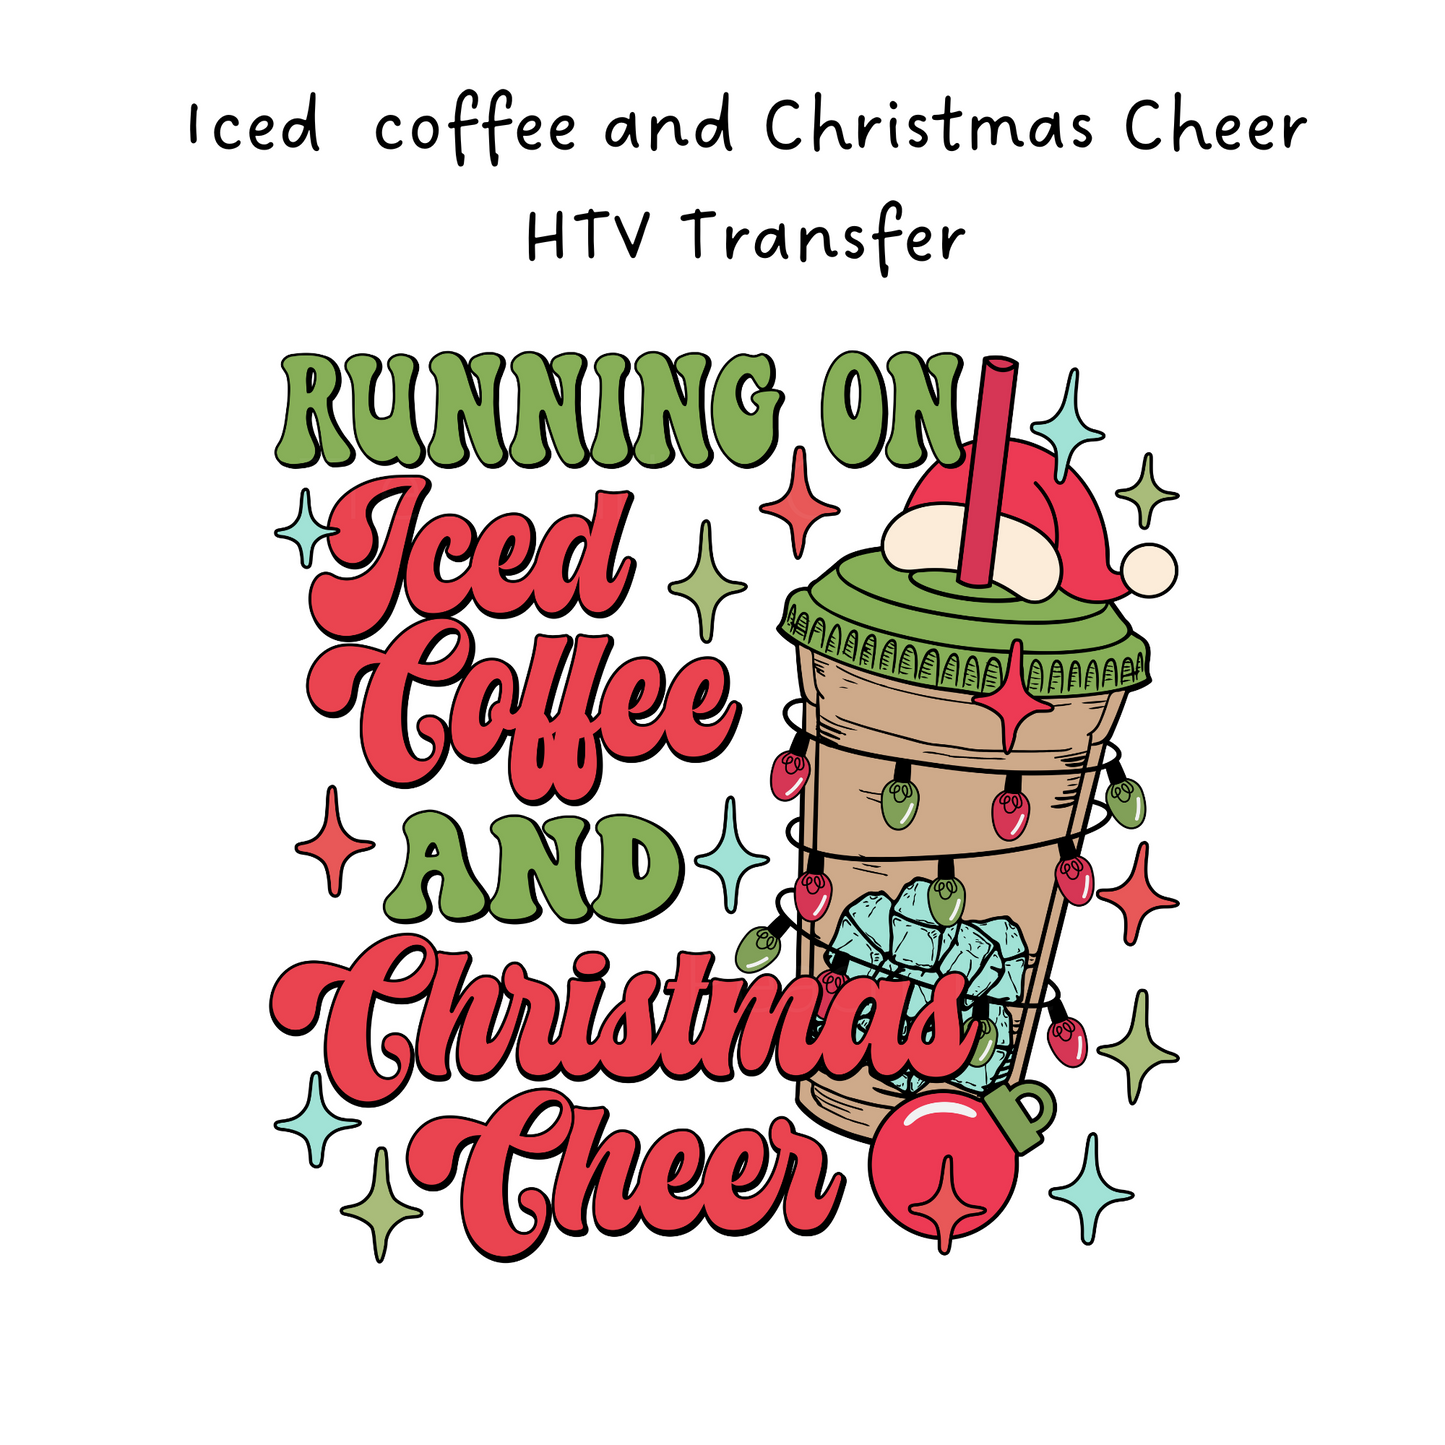 Running On Iced Coffee and Christmas Cheer HTV Transfer